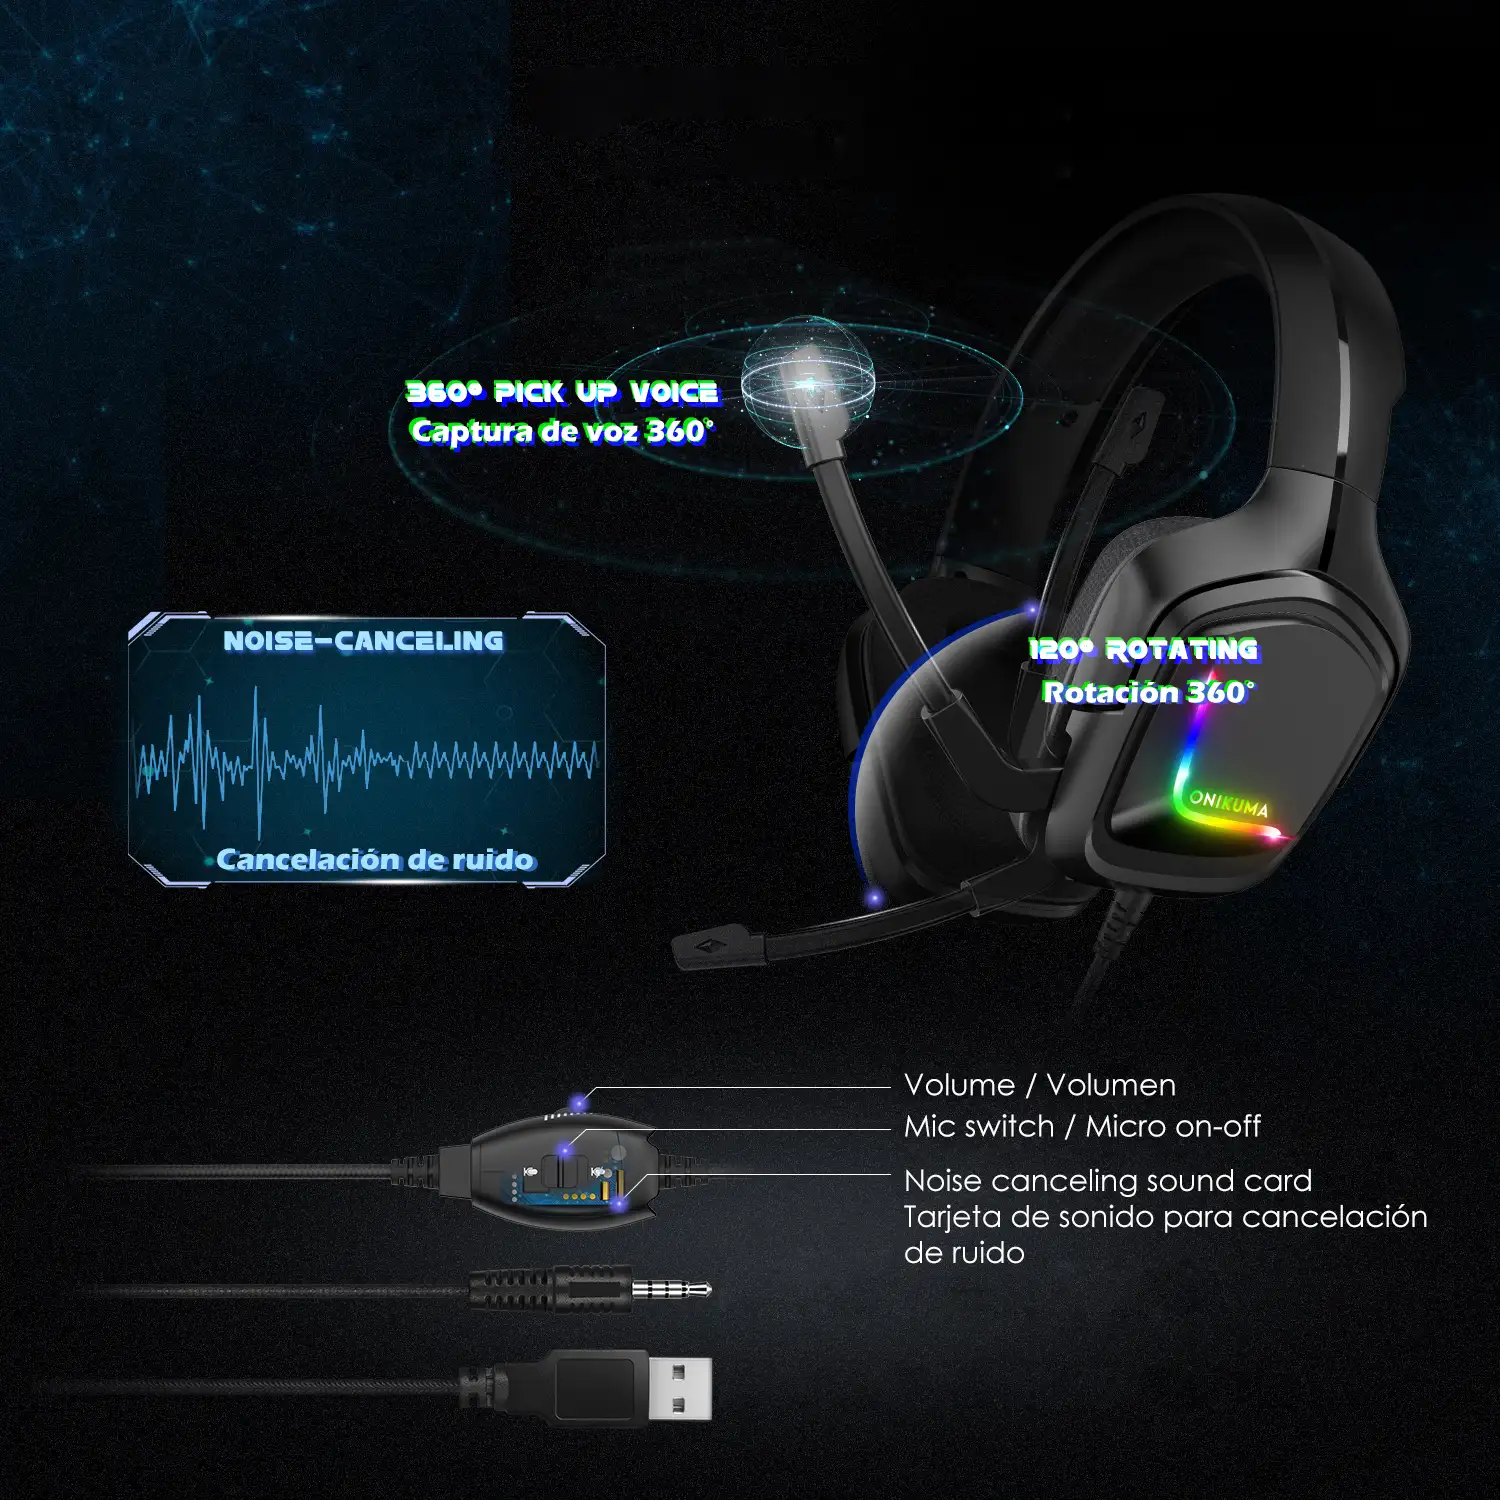 Headset Onikuma K20. Auriculares gaming por cable, con micro, luces LED RGB. Para PC, PS4, Xbox One, móvil, tablet, etc.